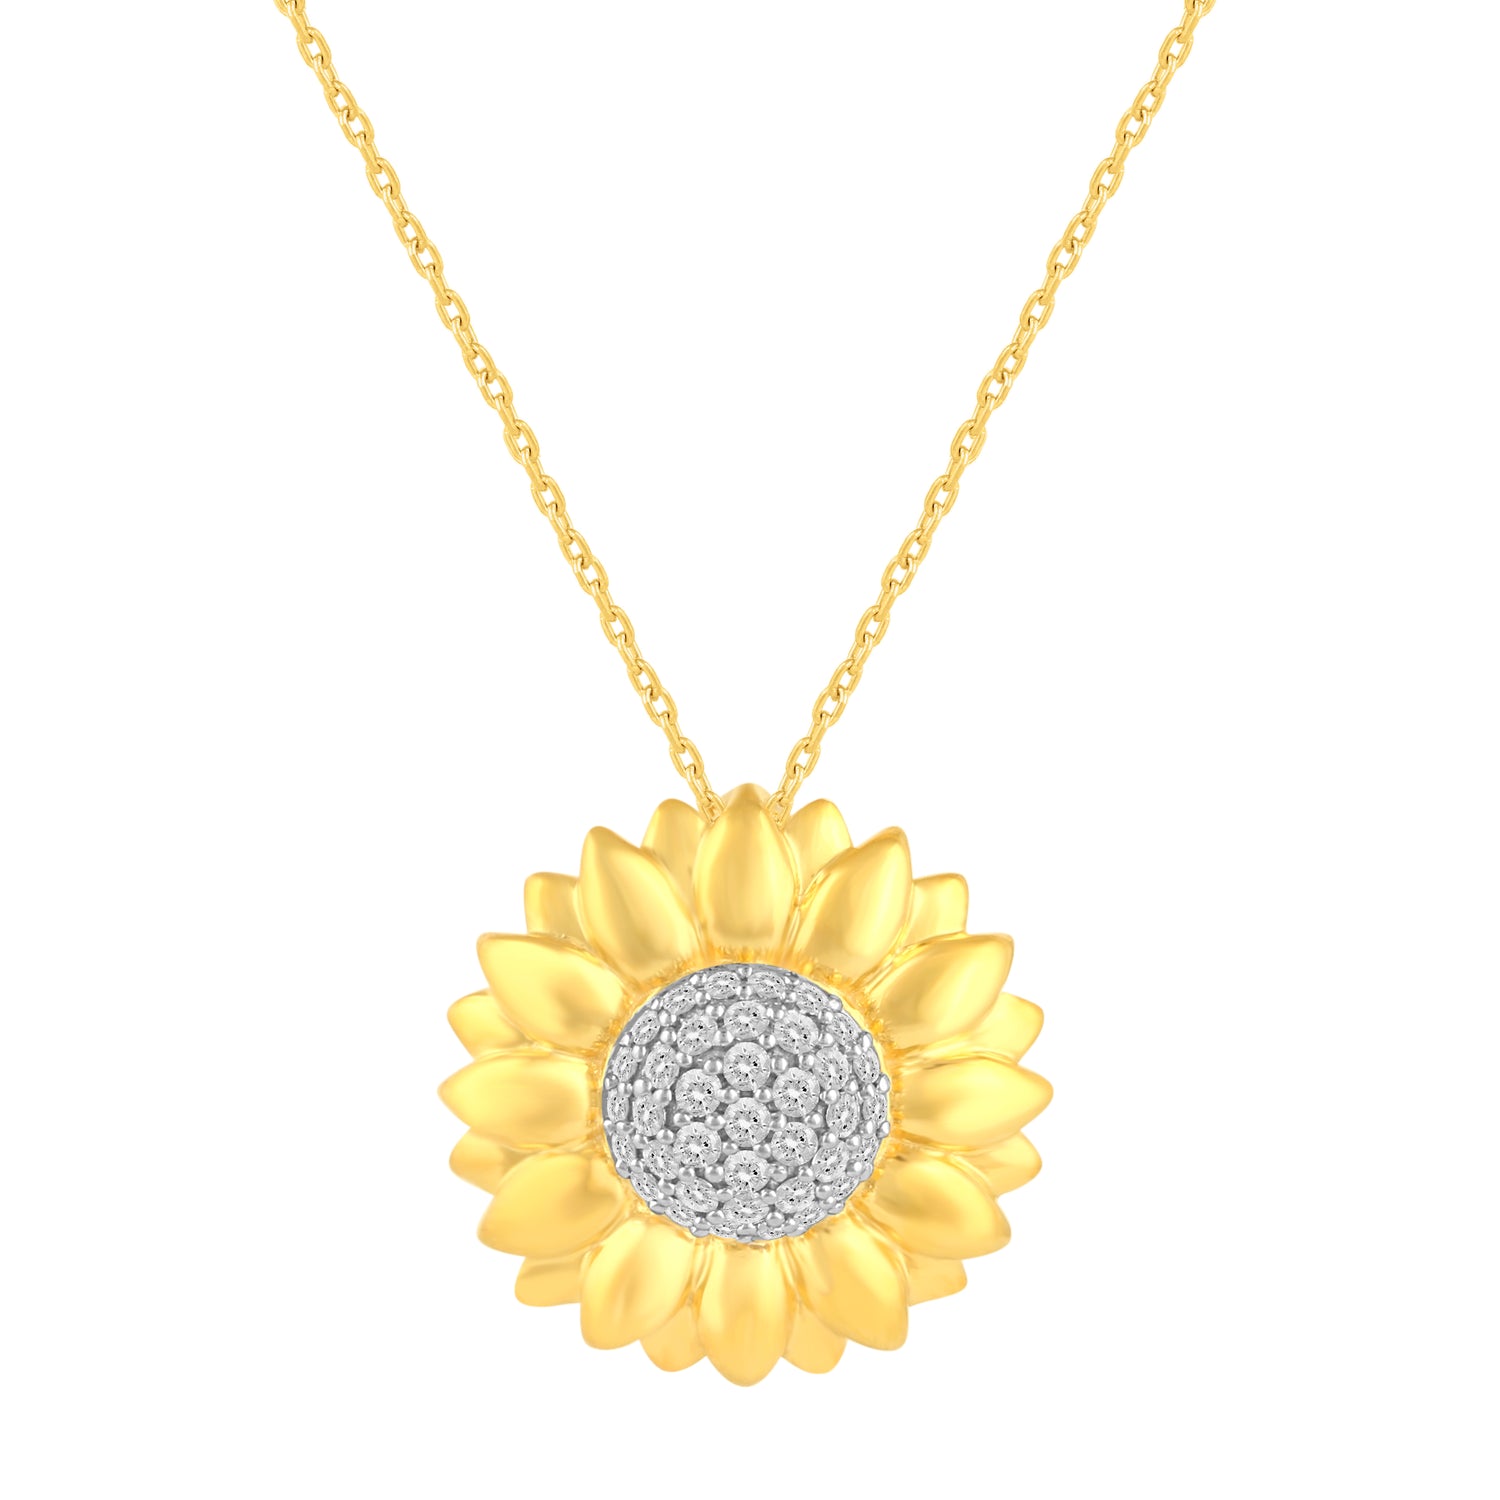 1/4 CT TW Diamond Sunflower Pendant in 925 Sterling Silver Yellow Gold